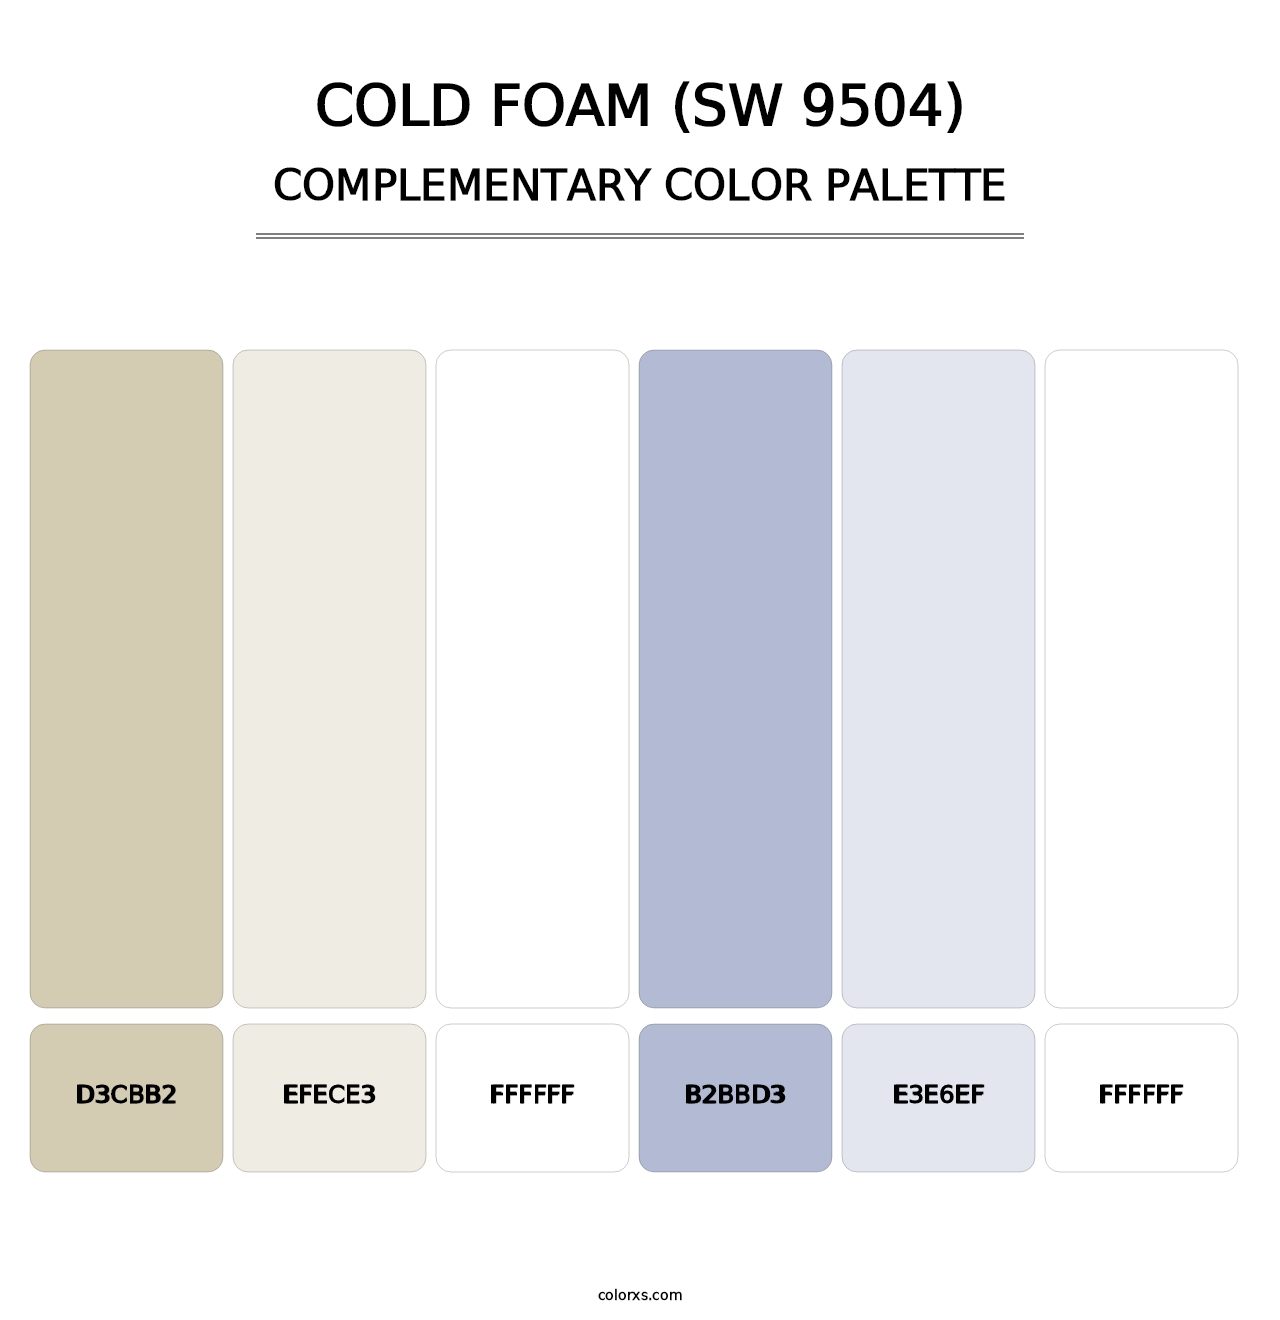 Cold Foam (SW 9504) - Complementary Color Palette